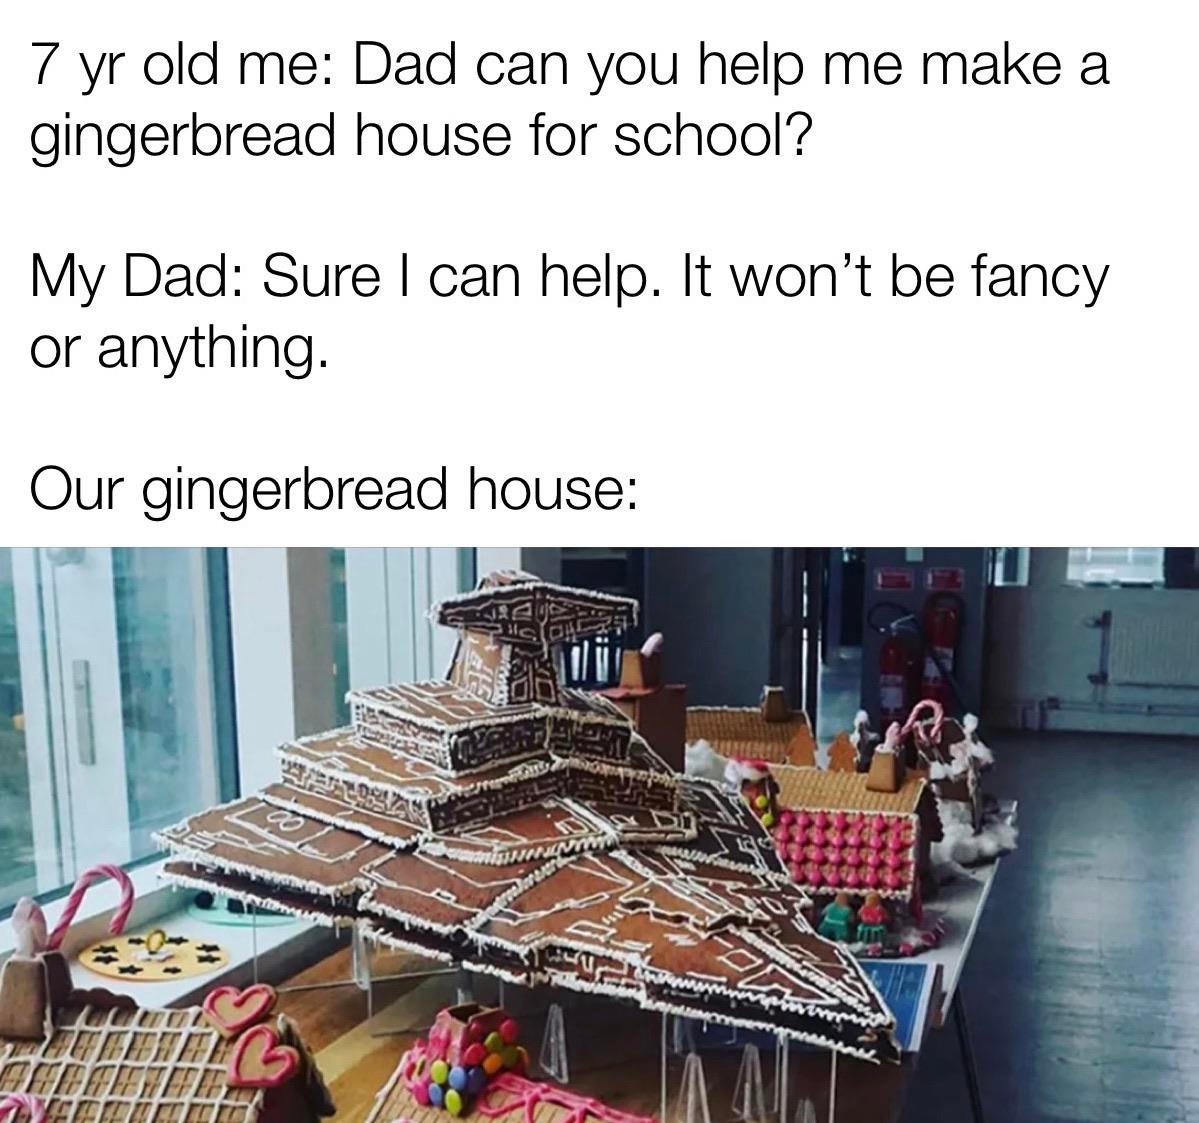 7 yr old me Dad can you help me make a gingerbread house for school? My Dad Sure I can help. It won't be fancy or anything. Our gingerbread house Audi lictos Neve Twittet Tit